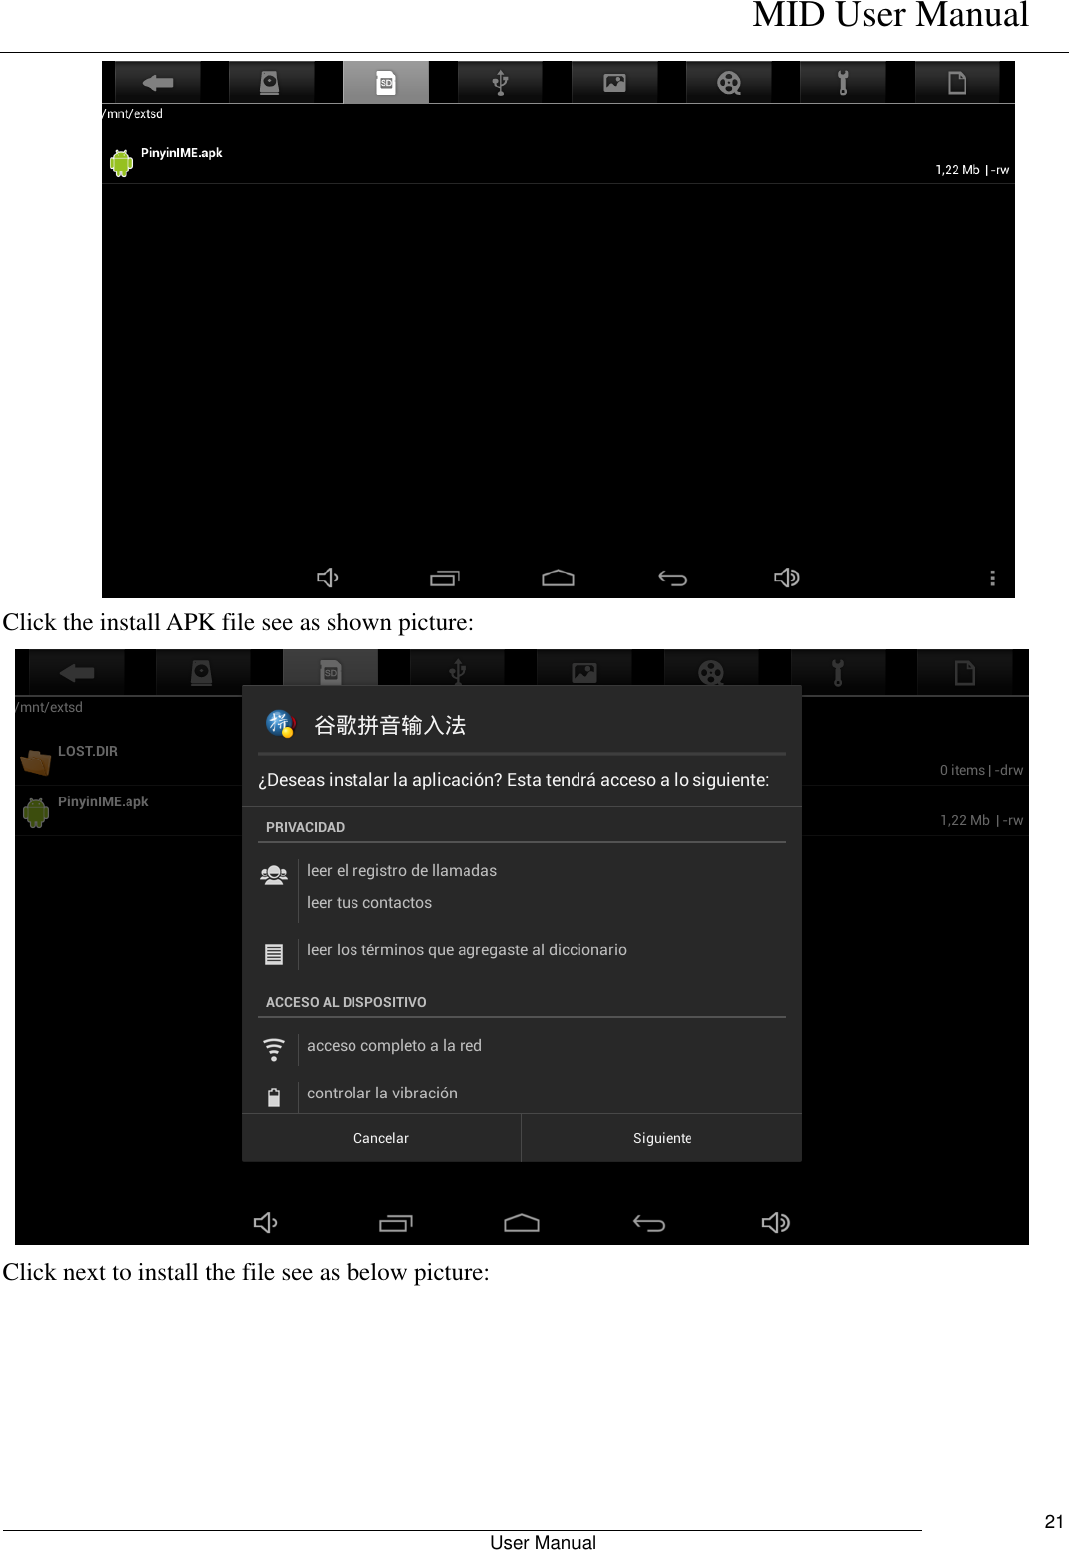    MID User Manual                                                        User Manual     21         Click the install APK file see as shown picture:    Click next to install the file see as below picture: 